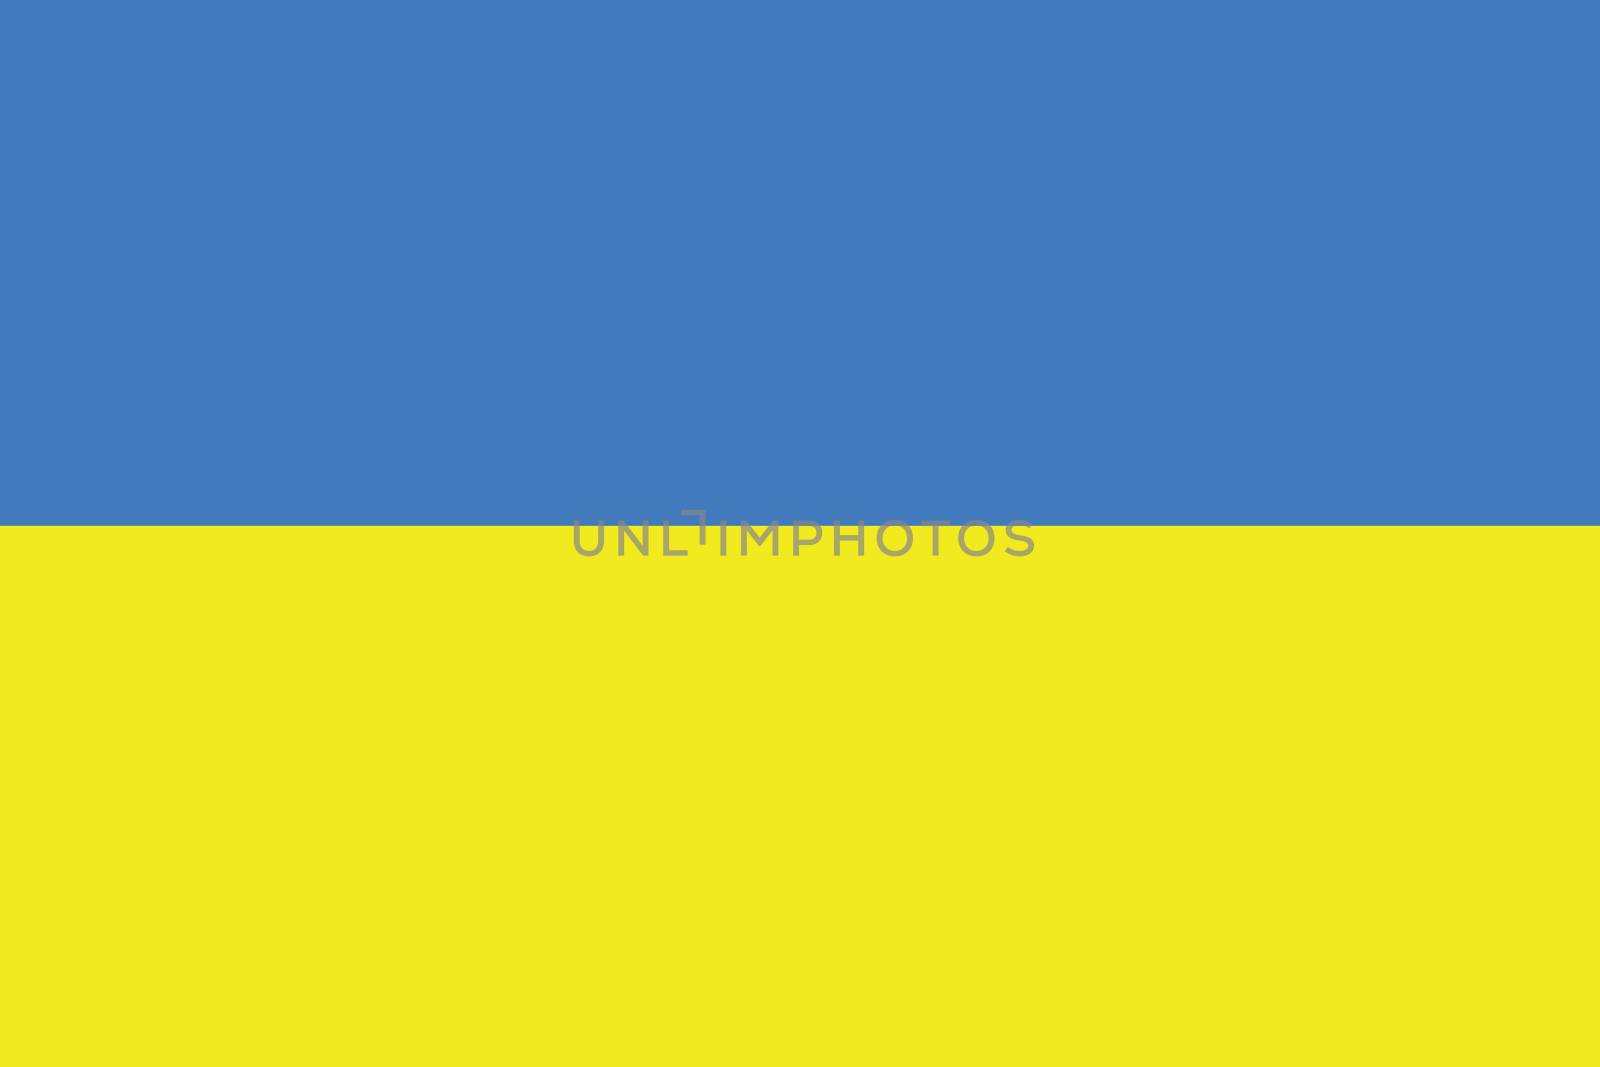 An Illustrated Drawing of the flag of Ukraine